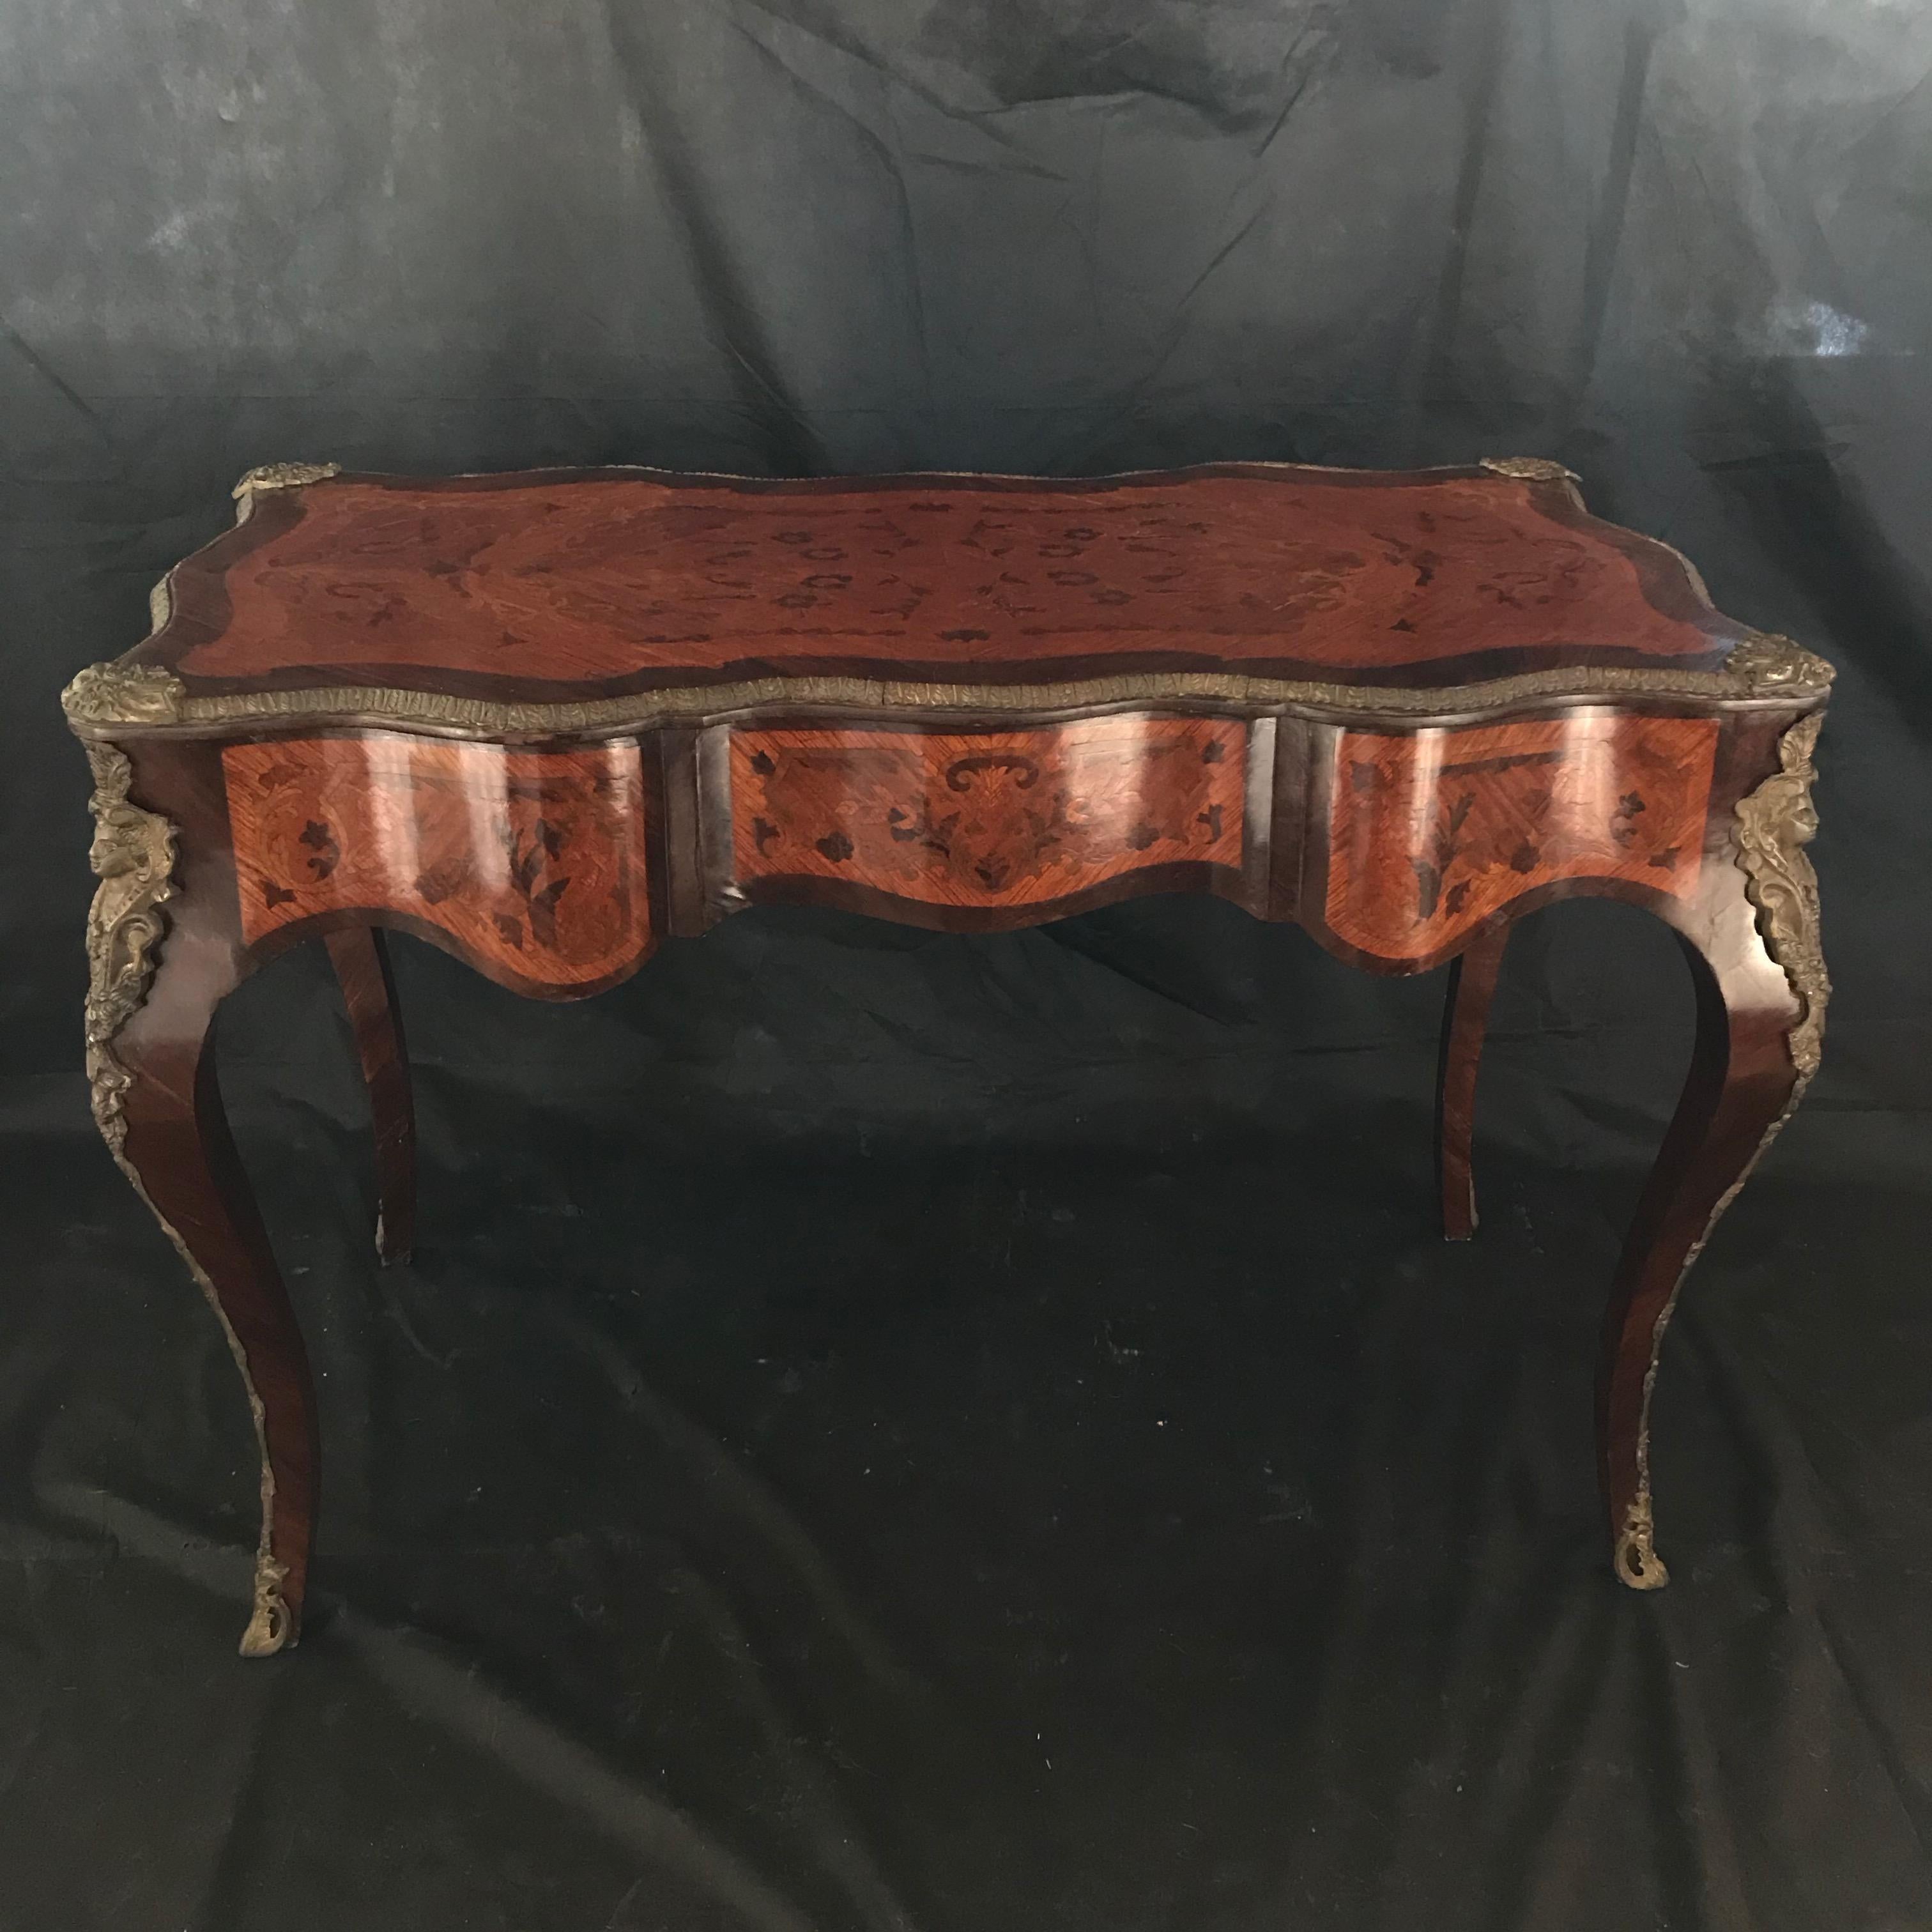 French Louis XV style mahogany and fruitwood marquetry desk for an aristrocratic lady having heavy solid bronze figural corners that lead to curved legs with bronze framing and bronze sabots. There are three drawers on the front supporting a